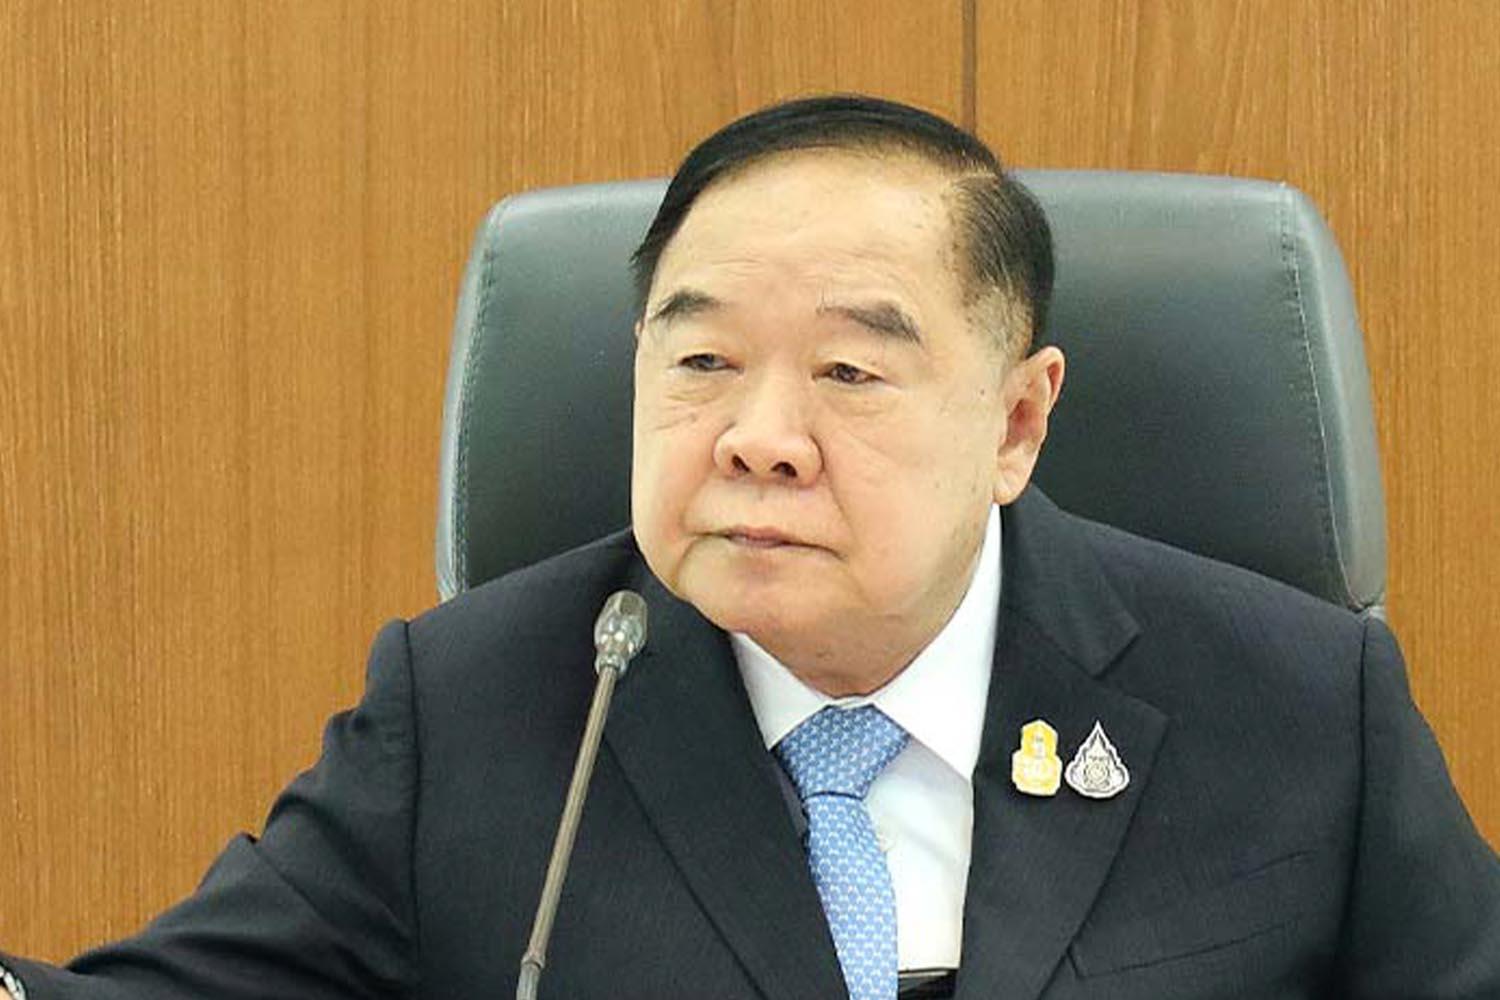 Prawit-inspects-the-government-Lampang-Phayao-Province-Jan-16-monitoring-government-policies-SPACEBAR-Hero